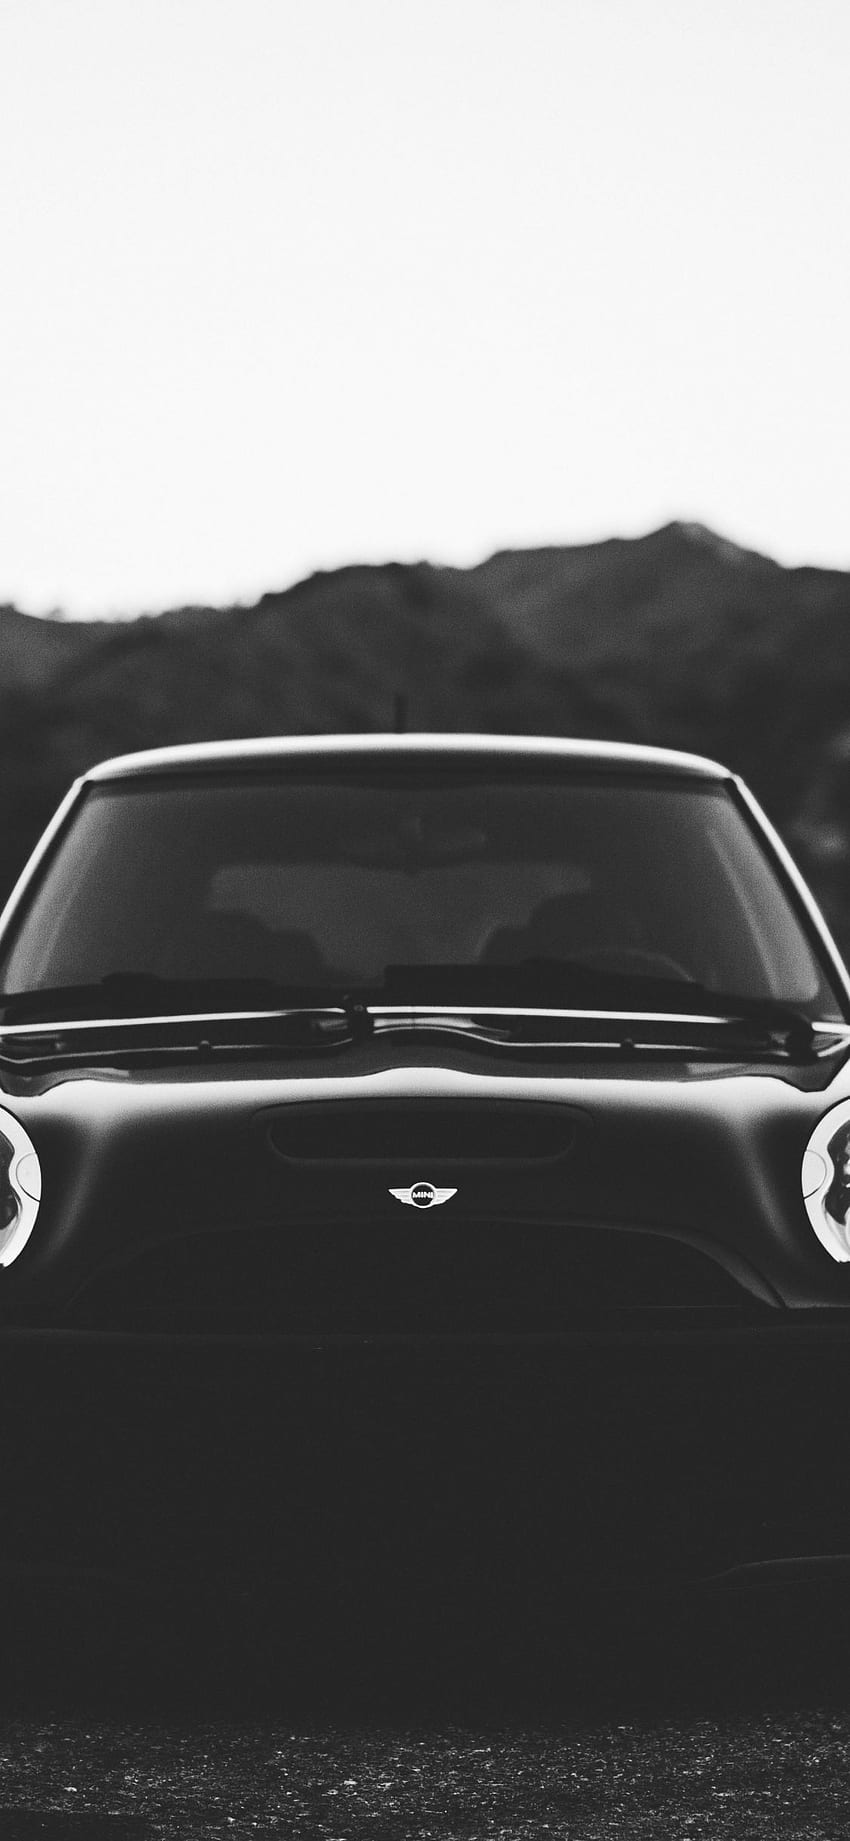 Mini Cooper For Iphone Hd Wallpapers Pxfuel